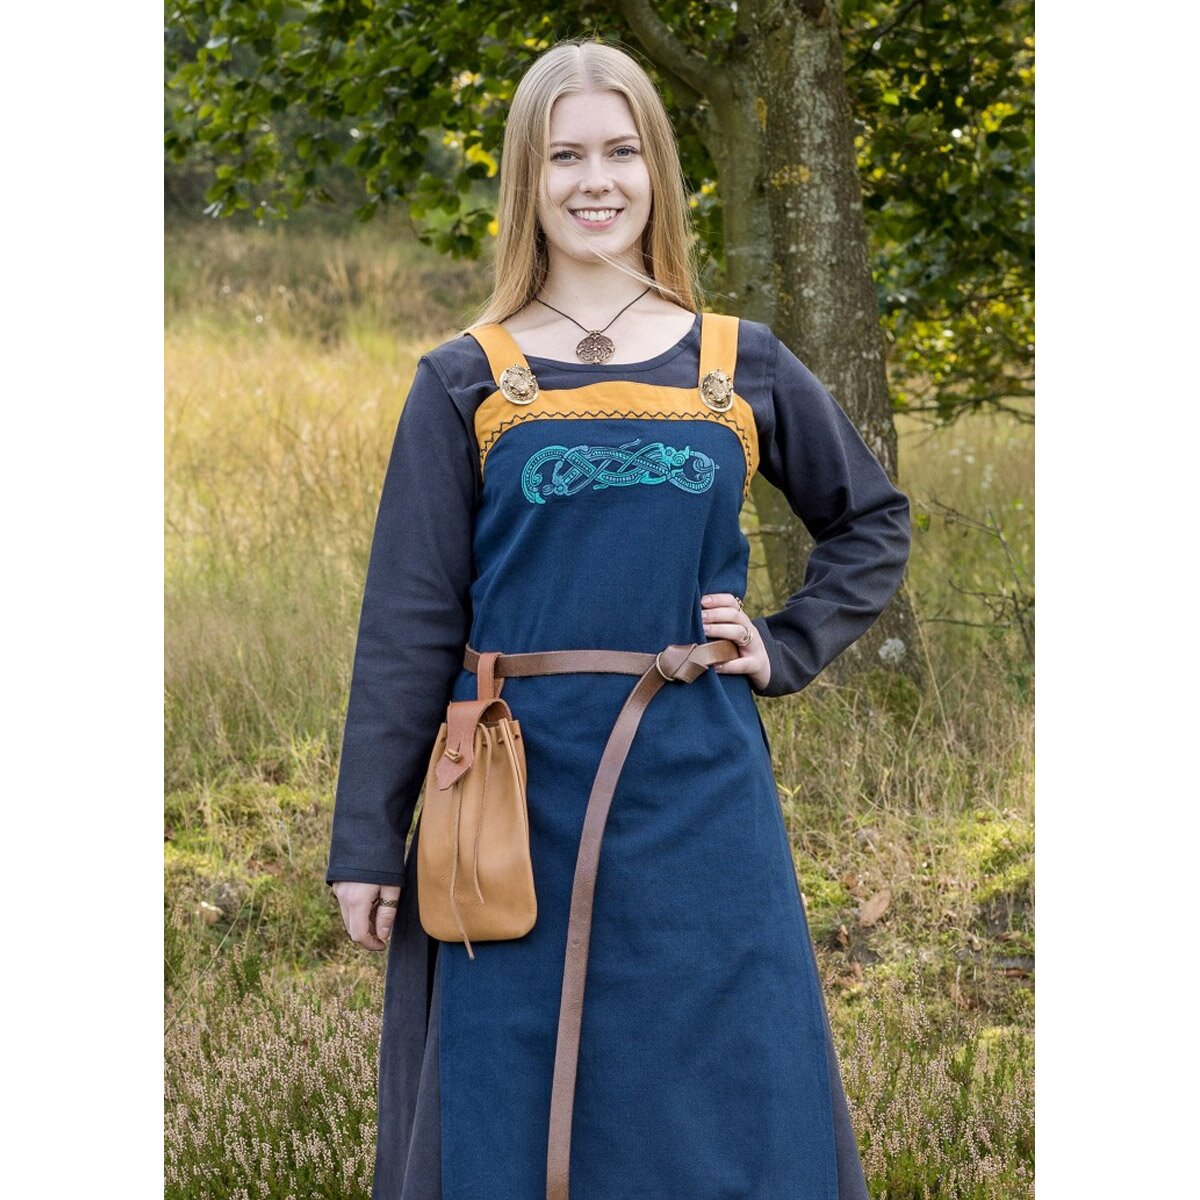 Viking apron dress embroidered red / green-blue, 39,99 €